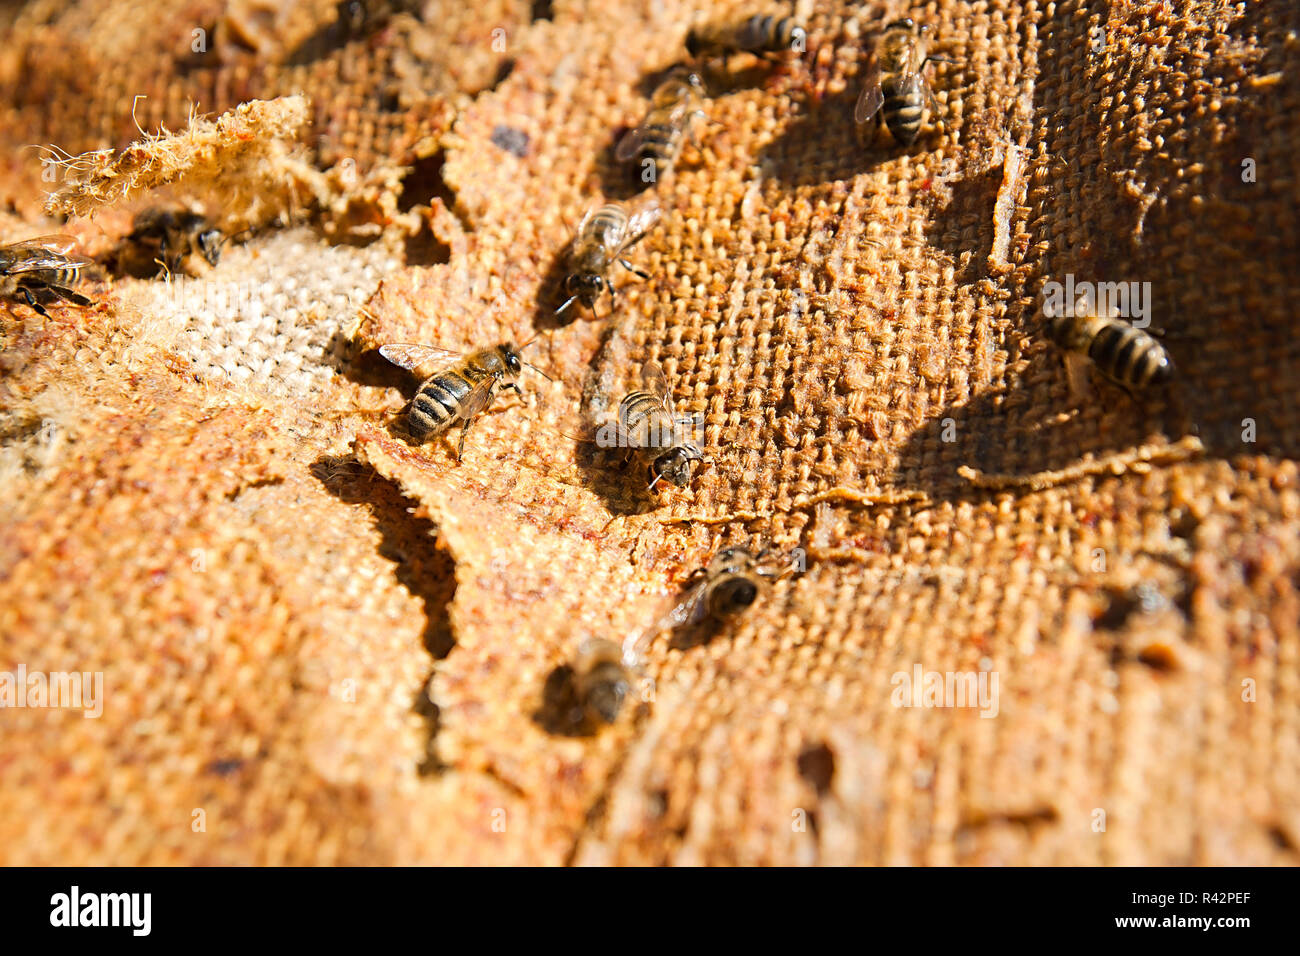 Busy bees, close up view of the working bees. Stock Photo